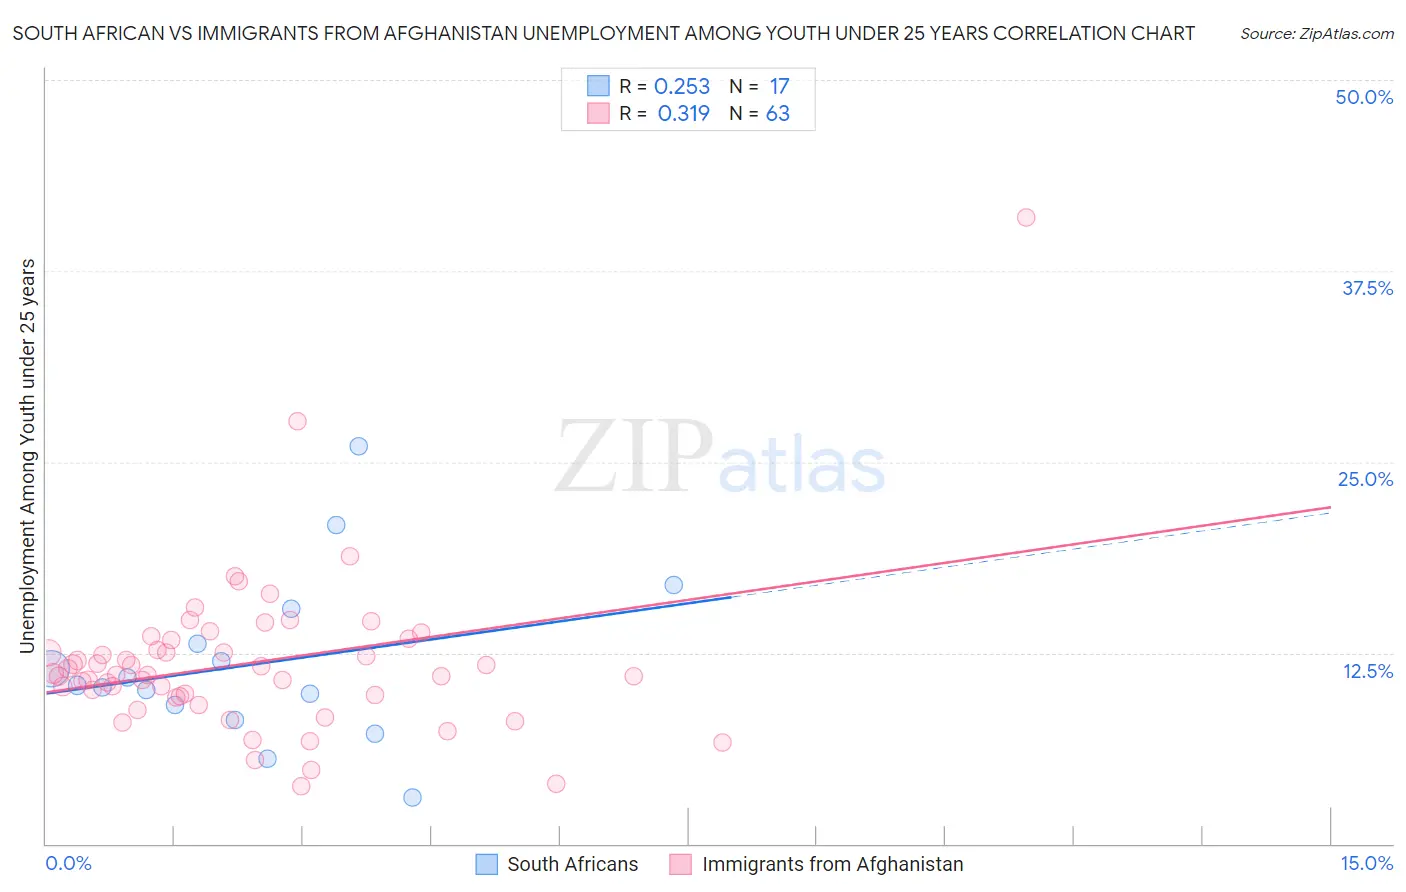 South African vs Immigrants from Afghanistan Unemployment Among Youth under 25 years